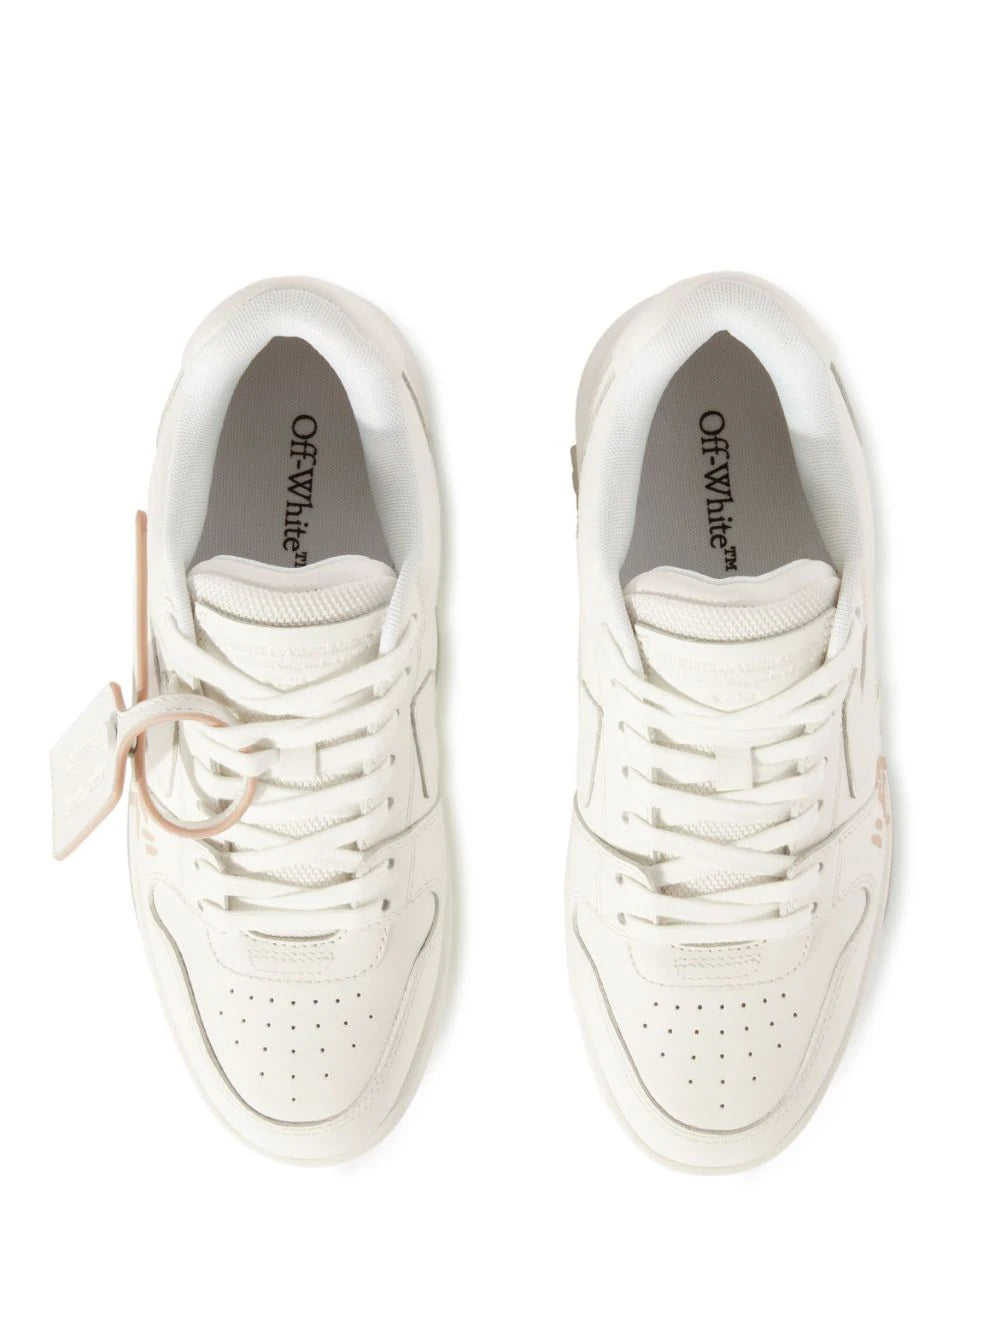 OFF-WHITE WOMEN Out Of Office "For Walking" Leather Sneakers White/Pink - MAISONDEFASHION.COM